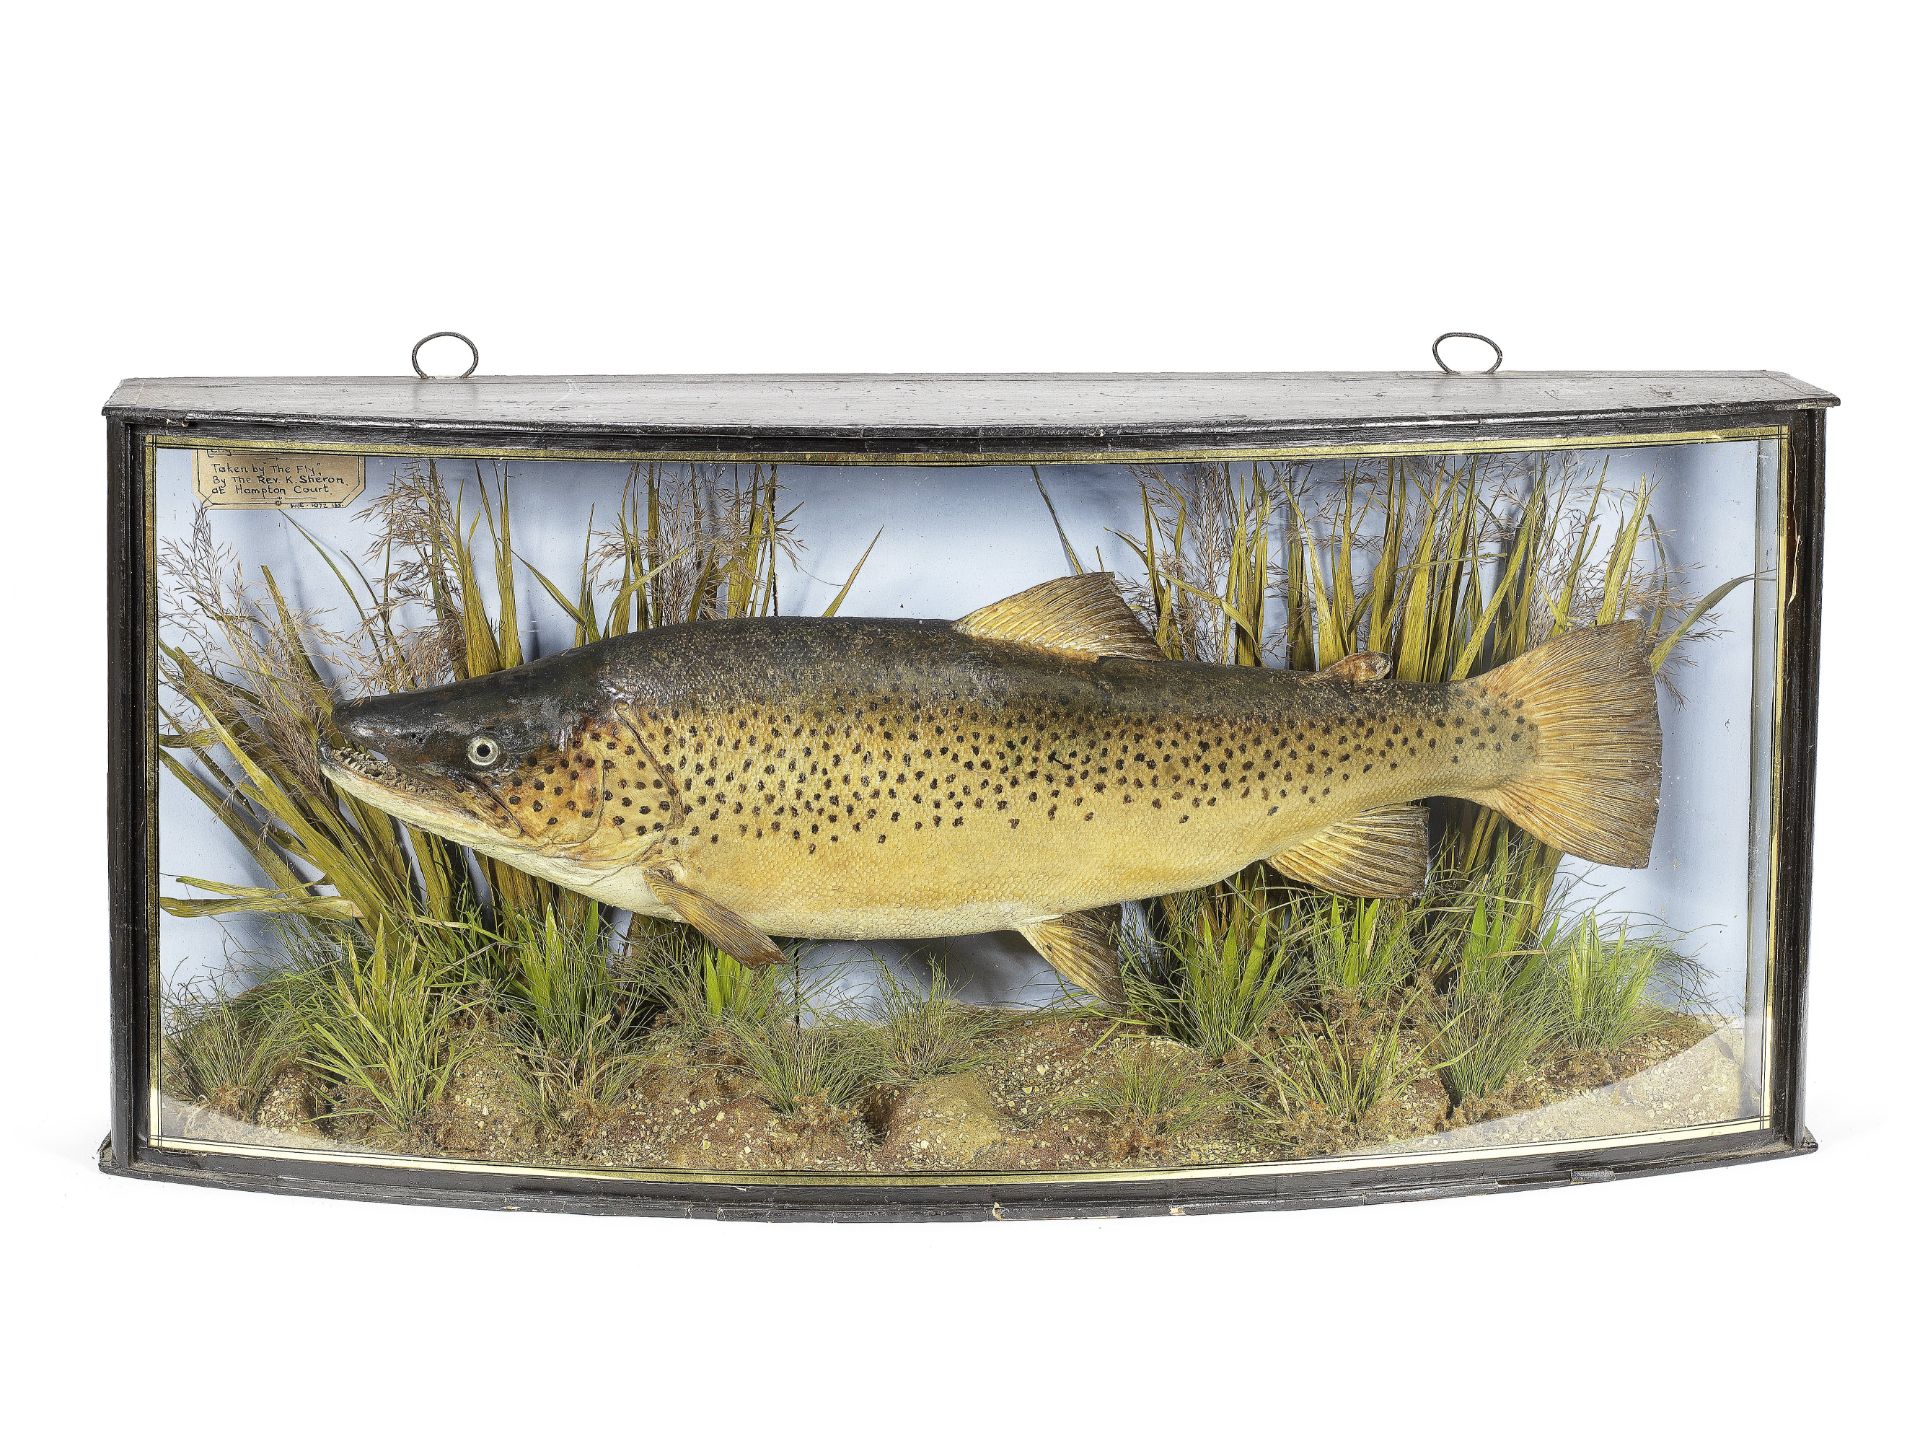 A cased '1922 English record' Thames trout